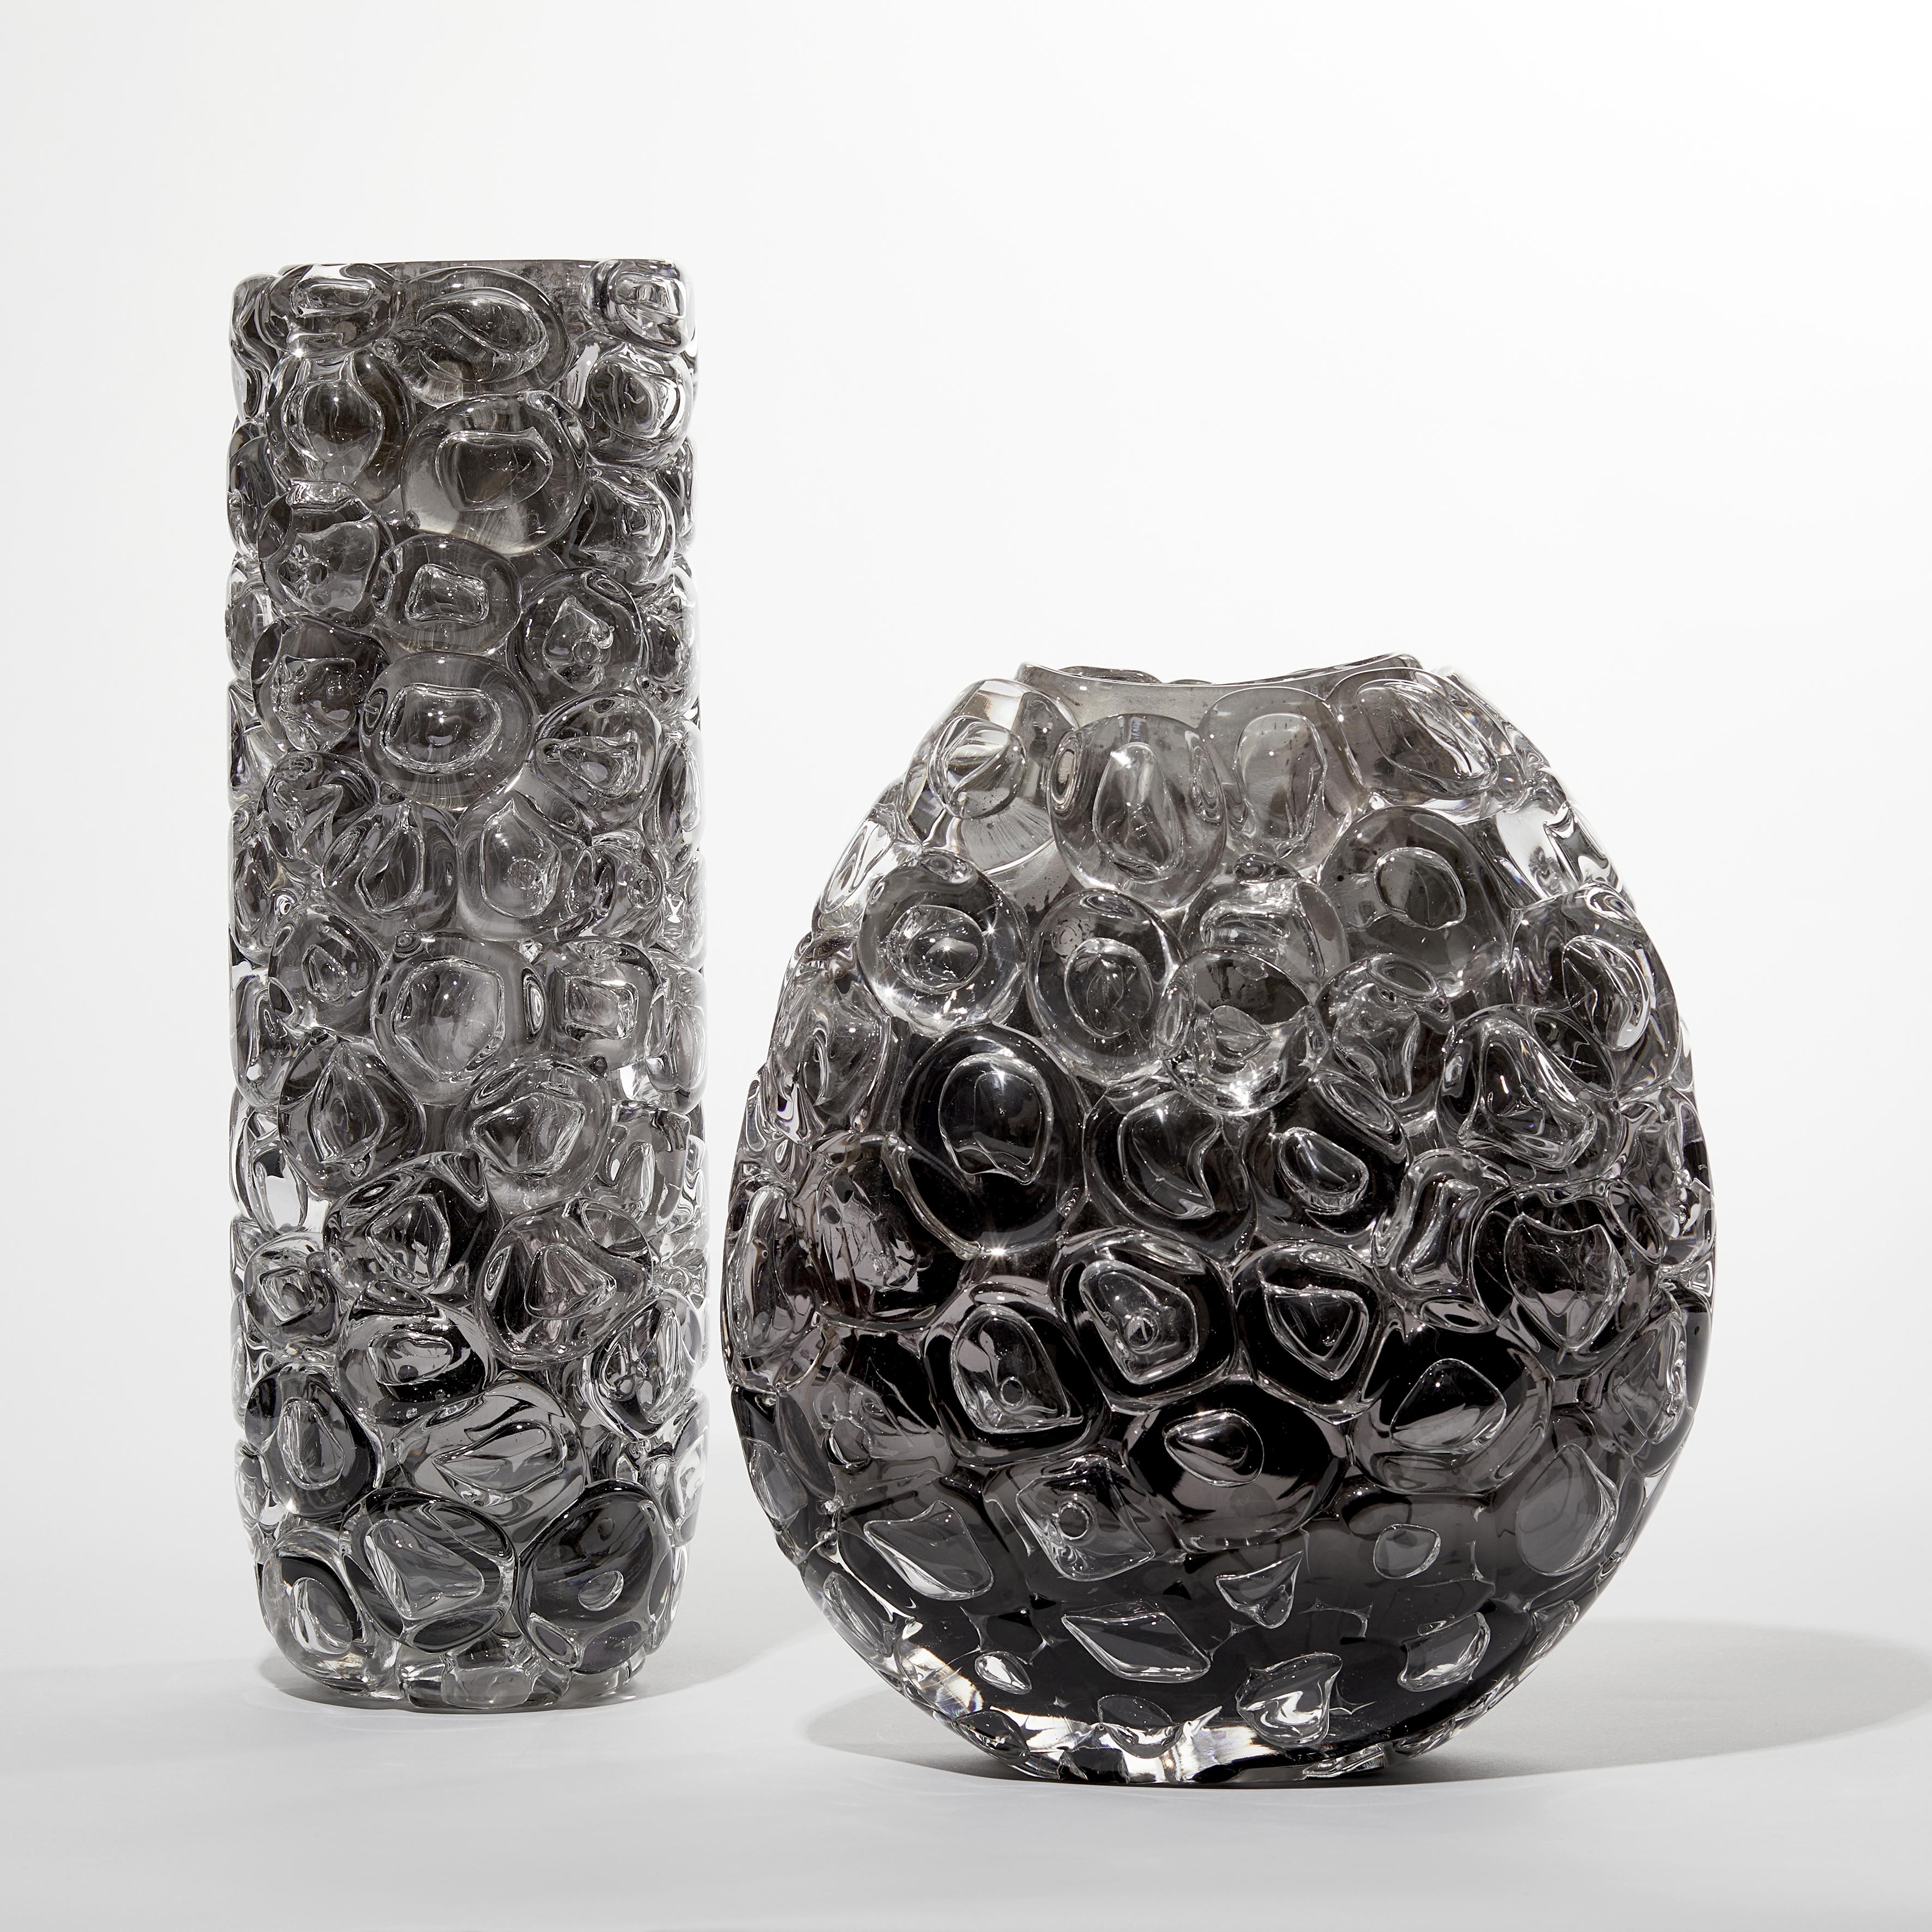 Bubblewrap in Monochrome I, a Silver and Clear Glass Vase by Allister Malcolm 4